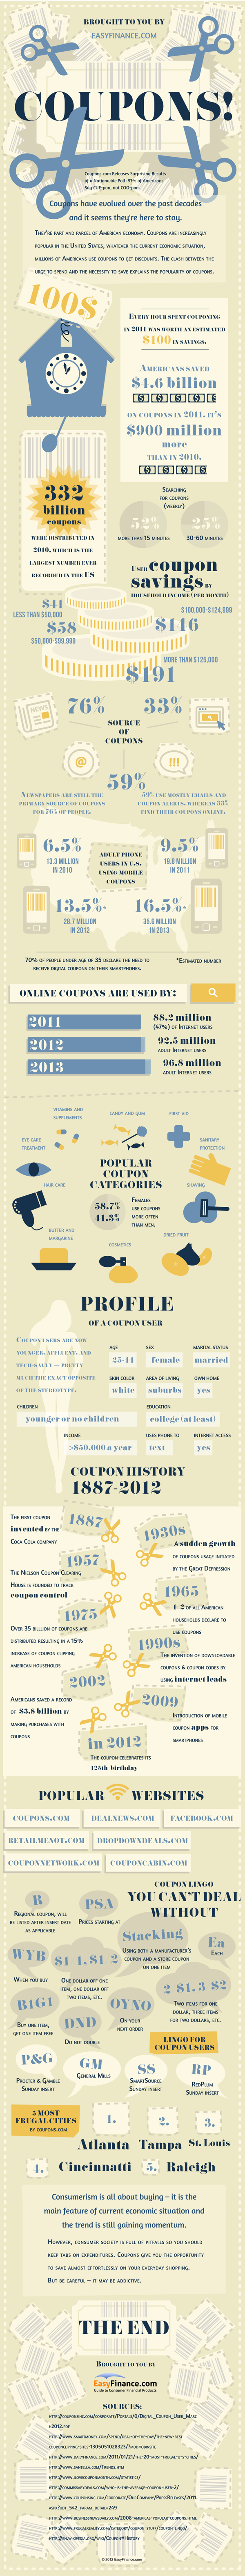 Coupons: Clip your Way to Saving (Infographic) 